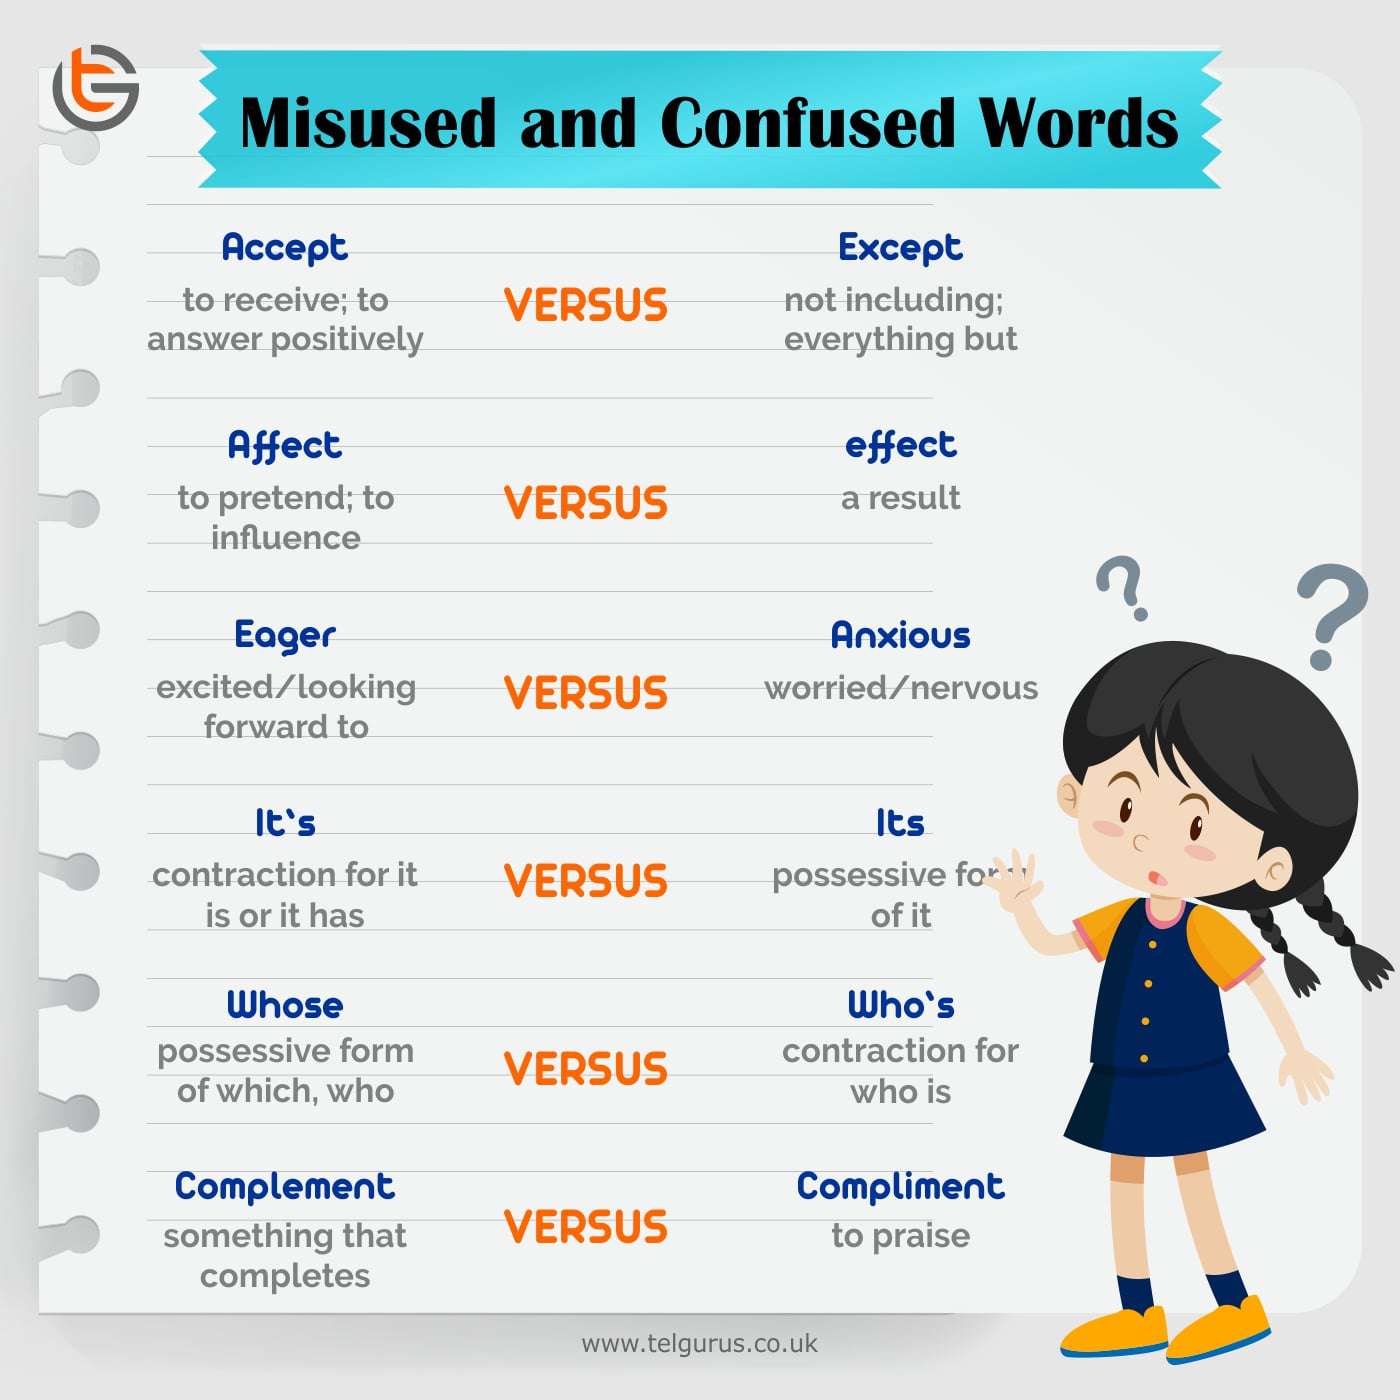 Misused and Confused Words